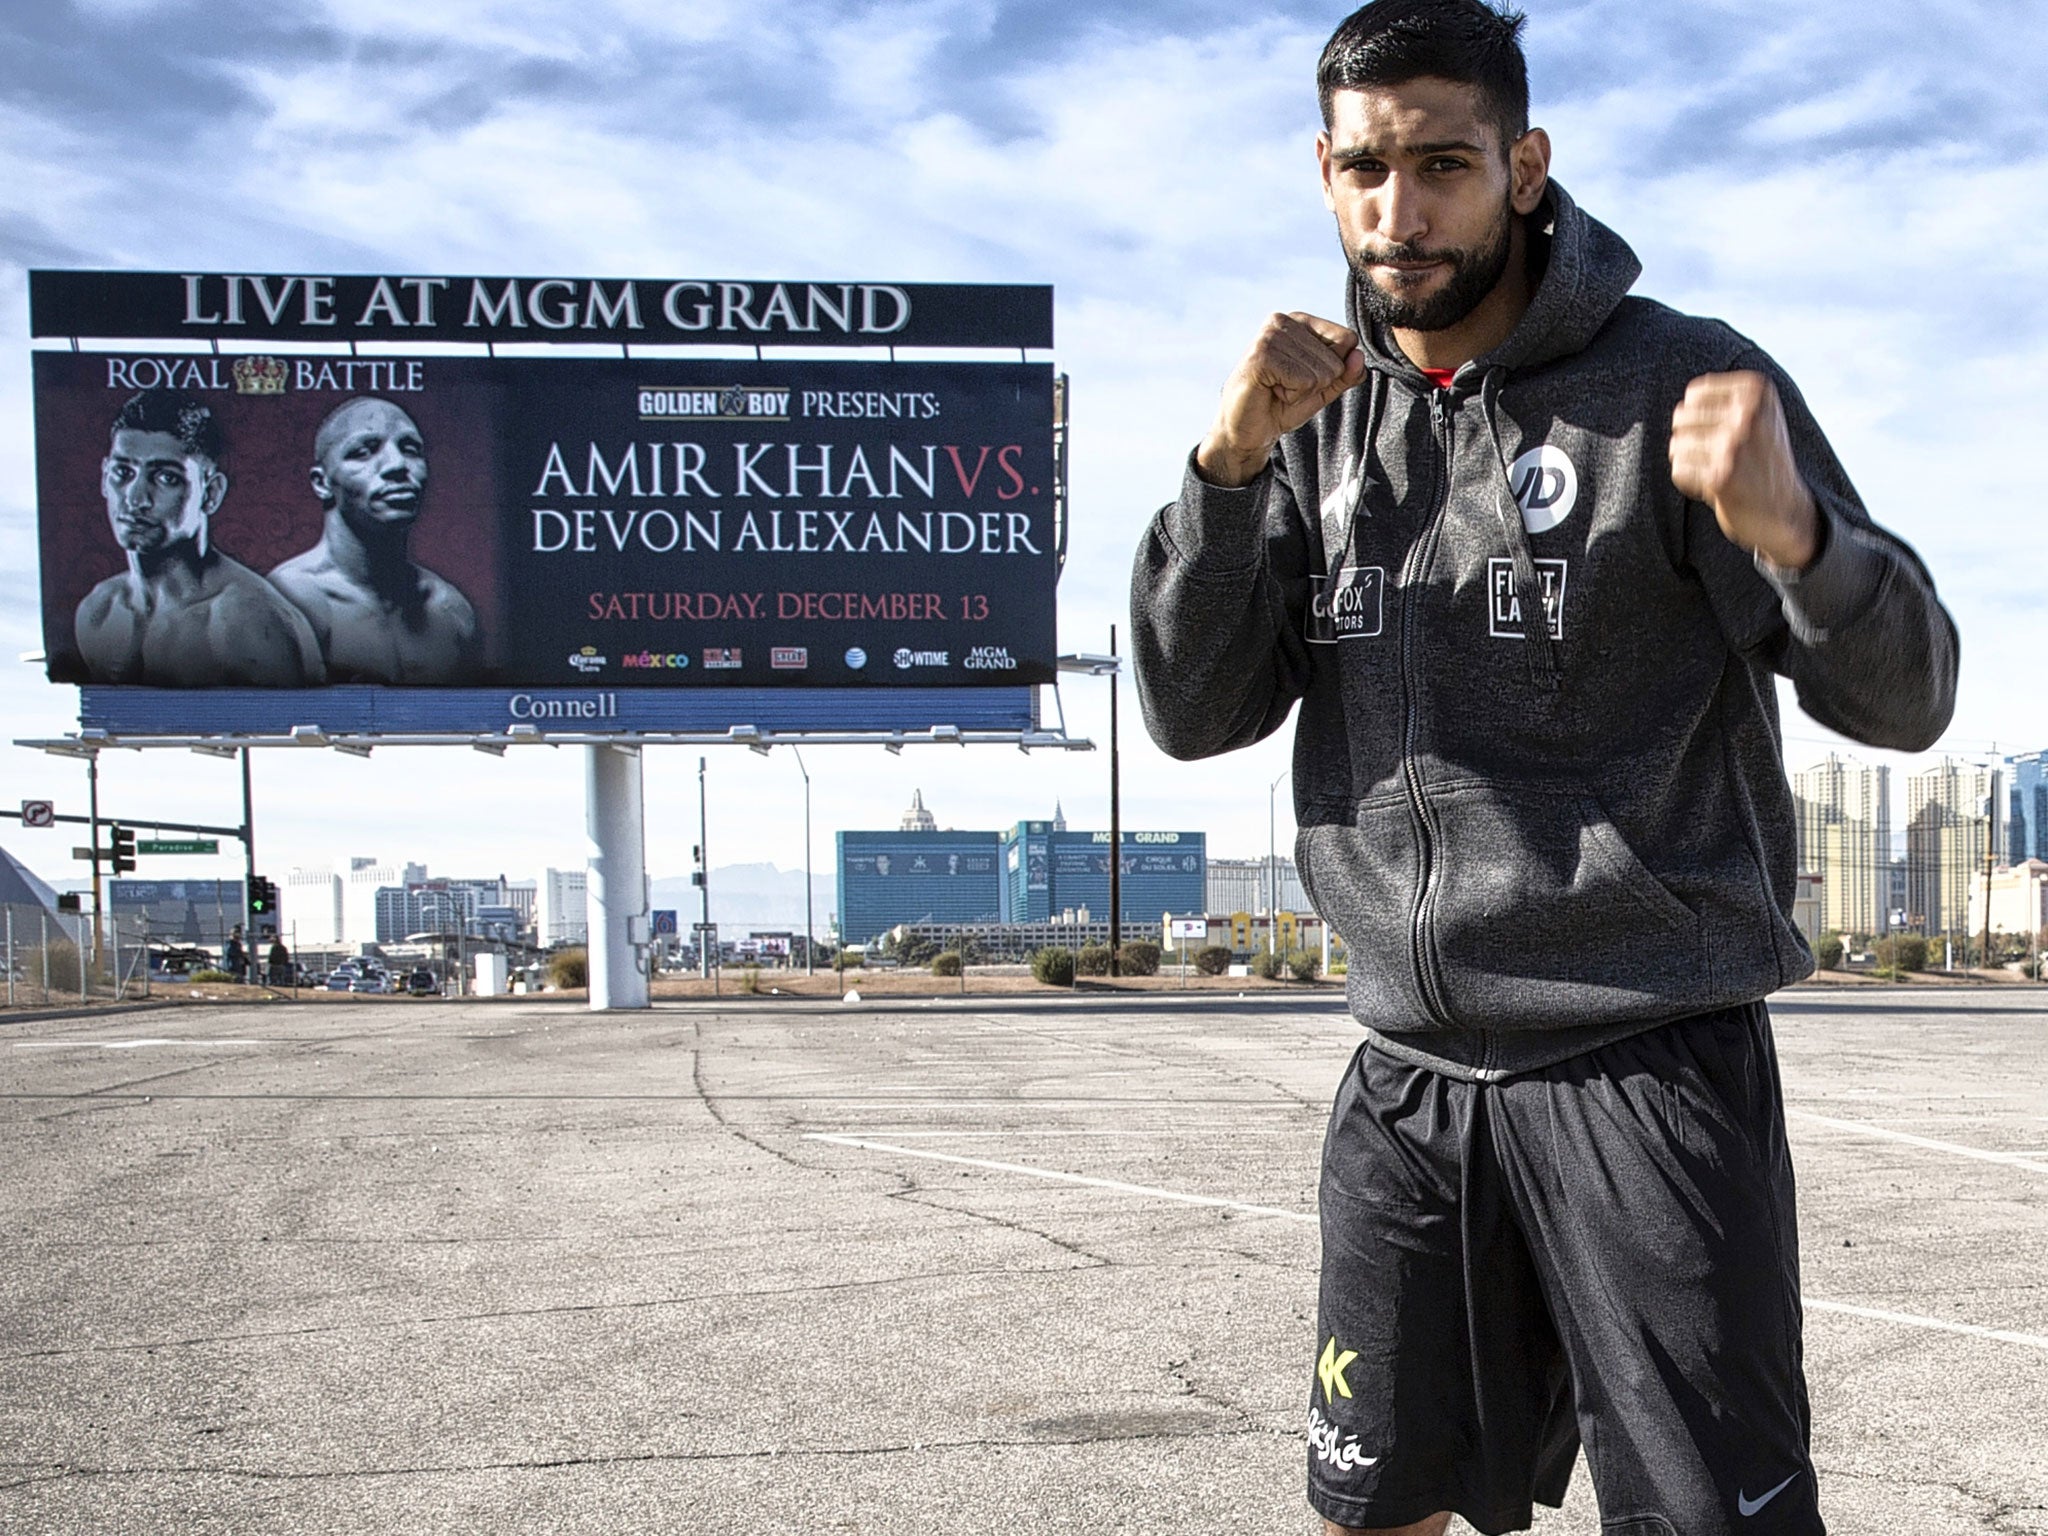 Amir Khan in front of a poster advertising his fight